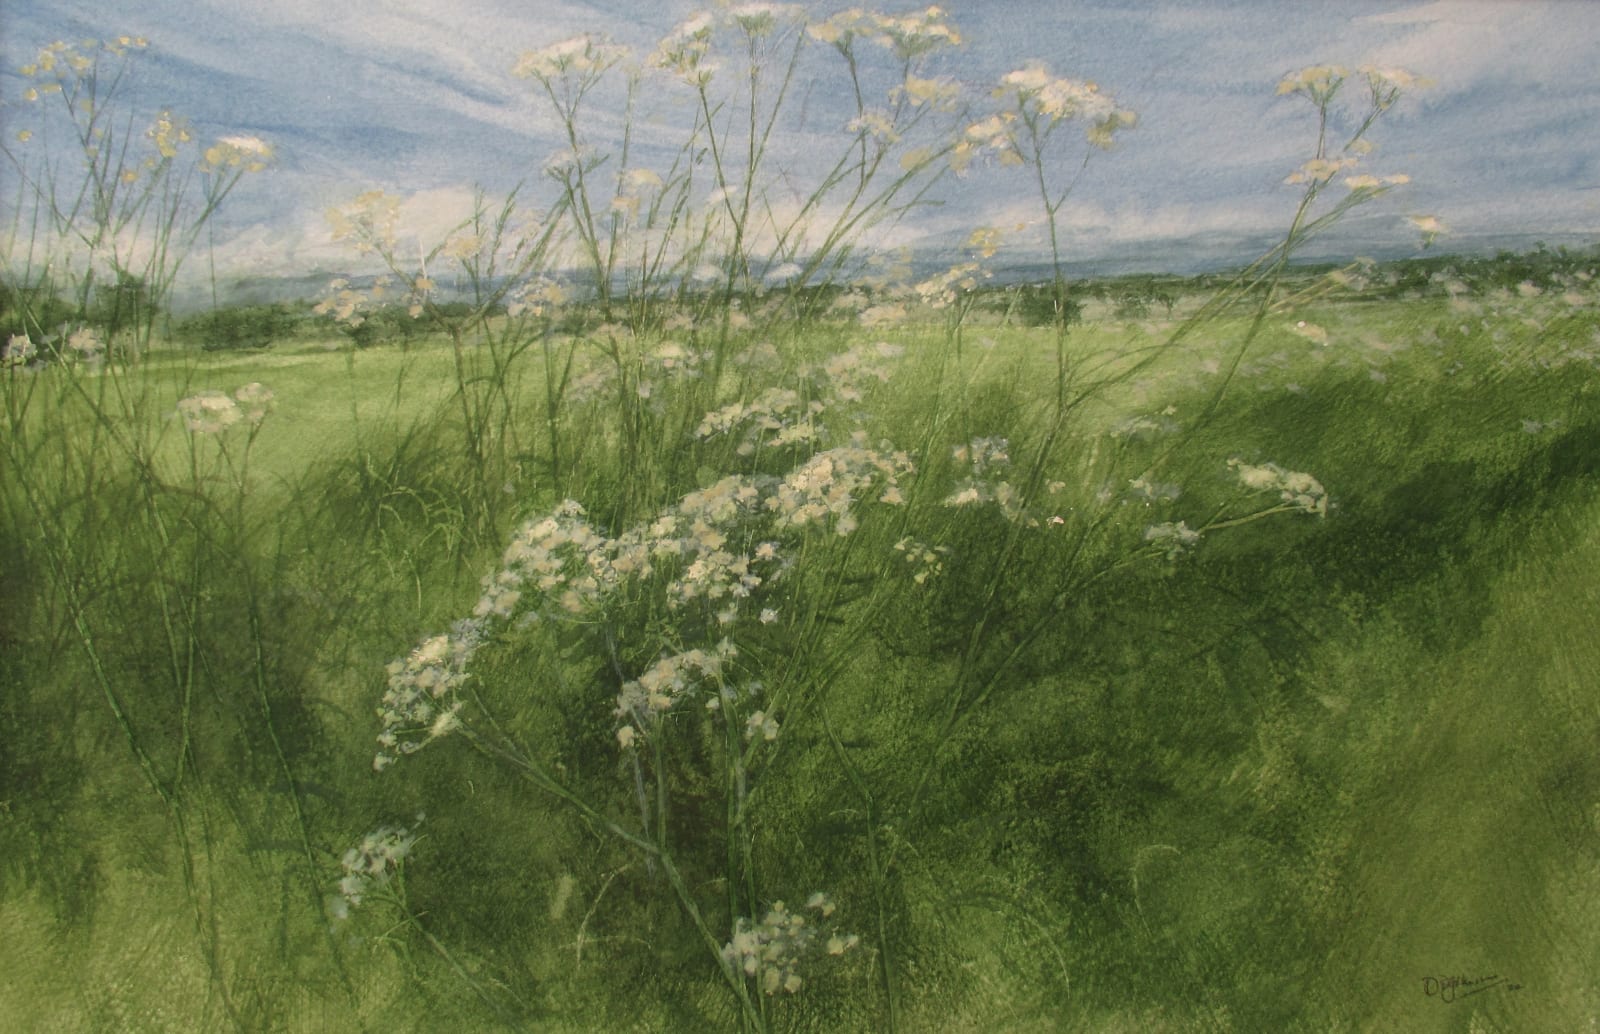 David Johnston RSW, Late Spring Field Edge, The Mearns